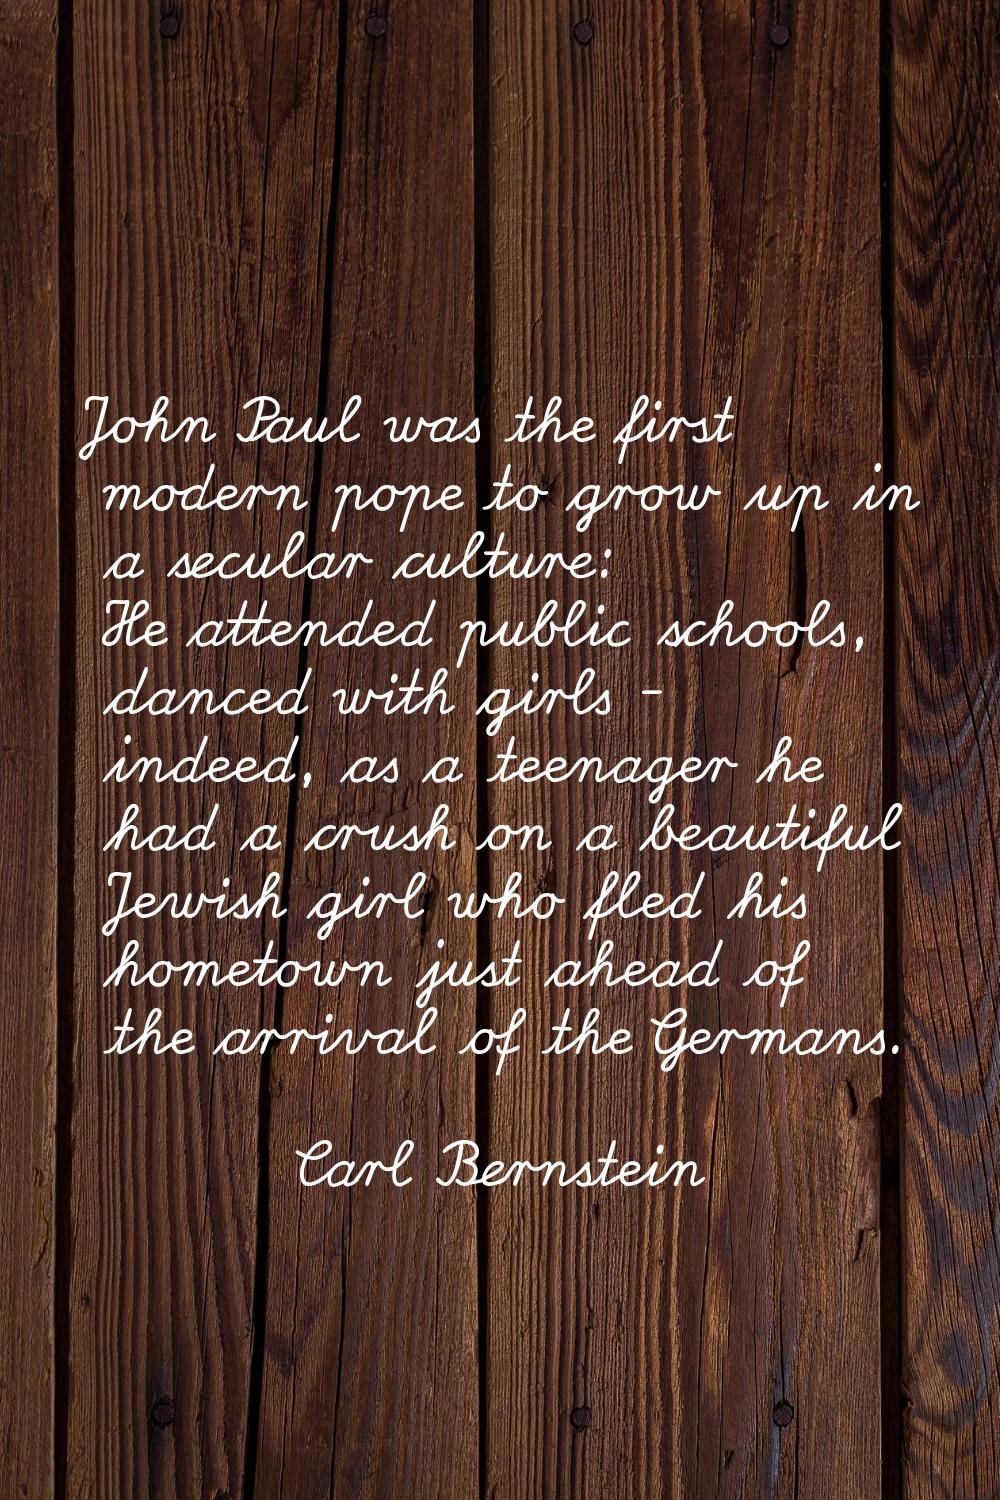 John Paul was the first modern pope to grow up in a secular culture: He attended public schools, da